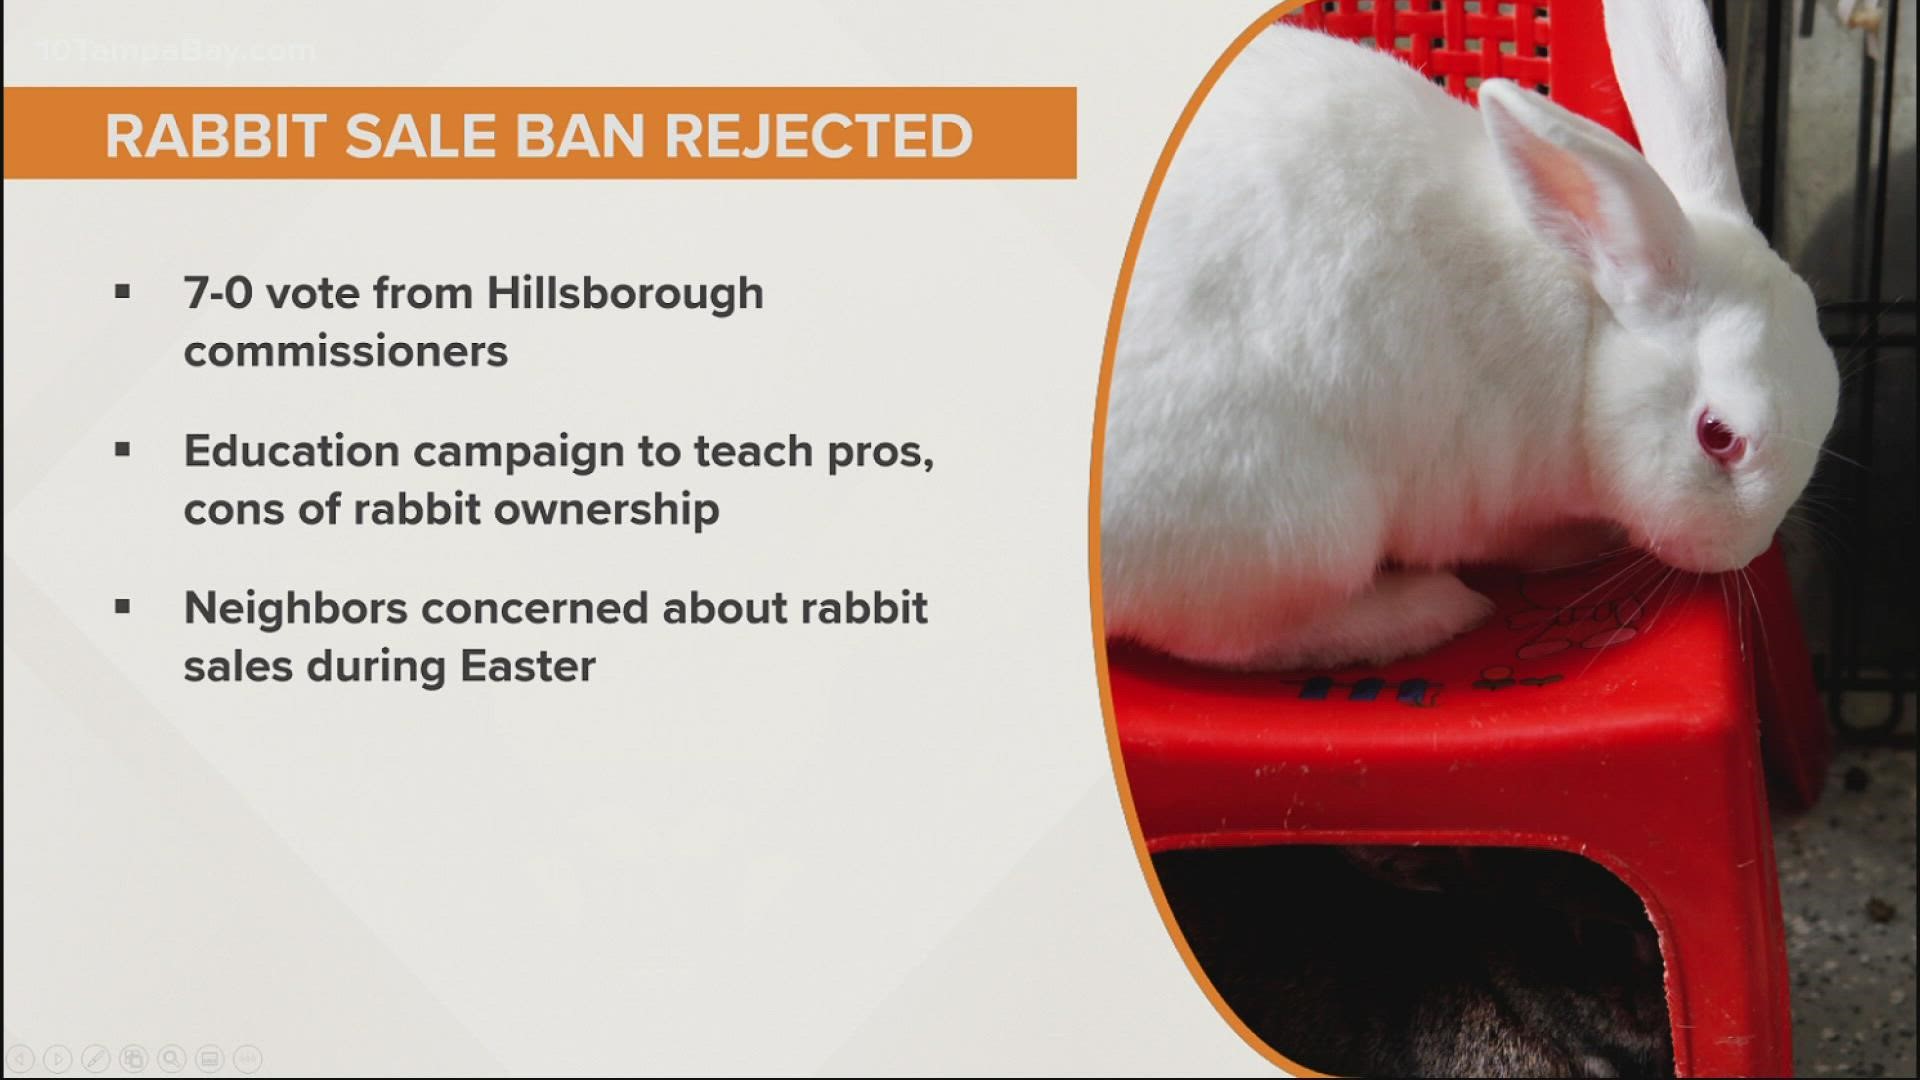 In a 7-0 vote, commissioners decided to educate the public about rabbit ownership rather than ban their sale.